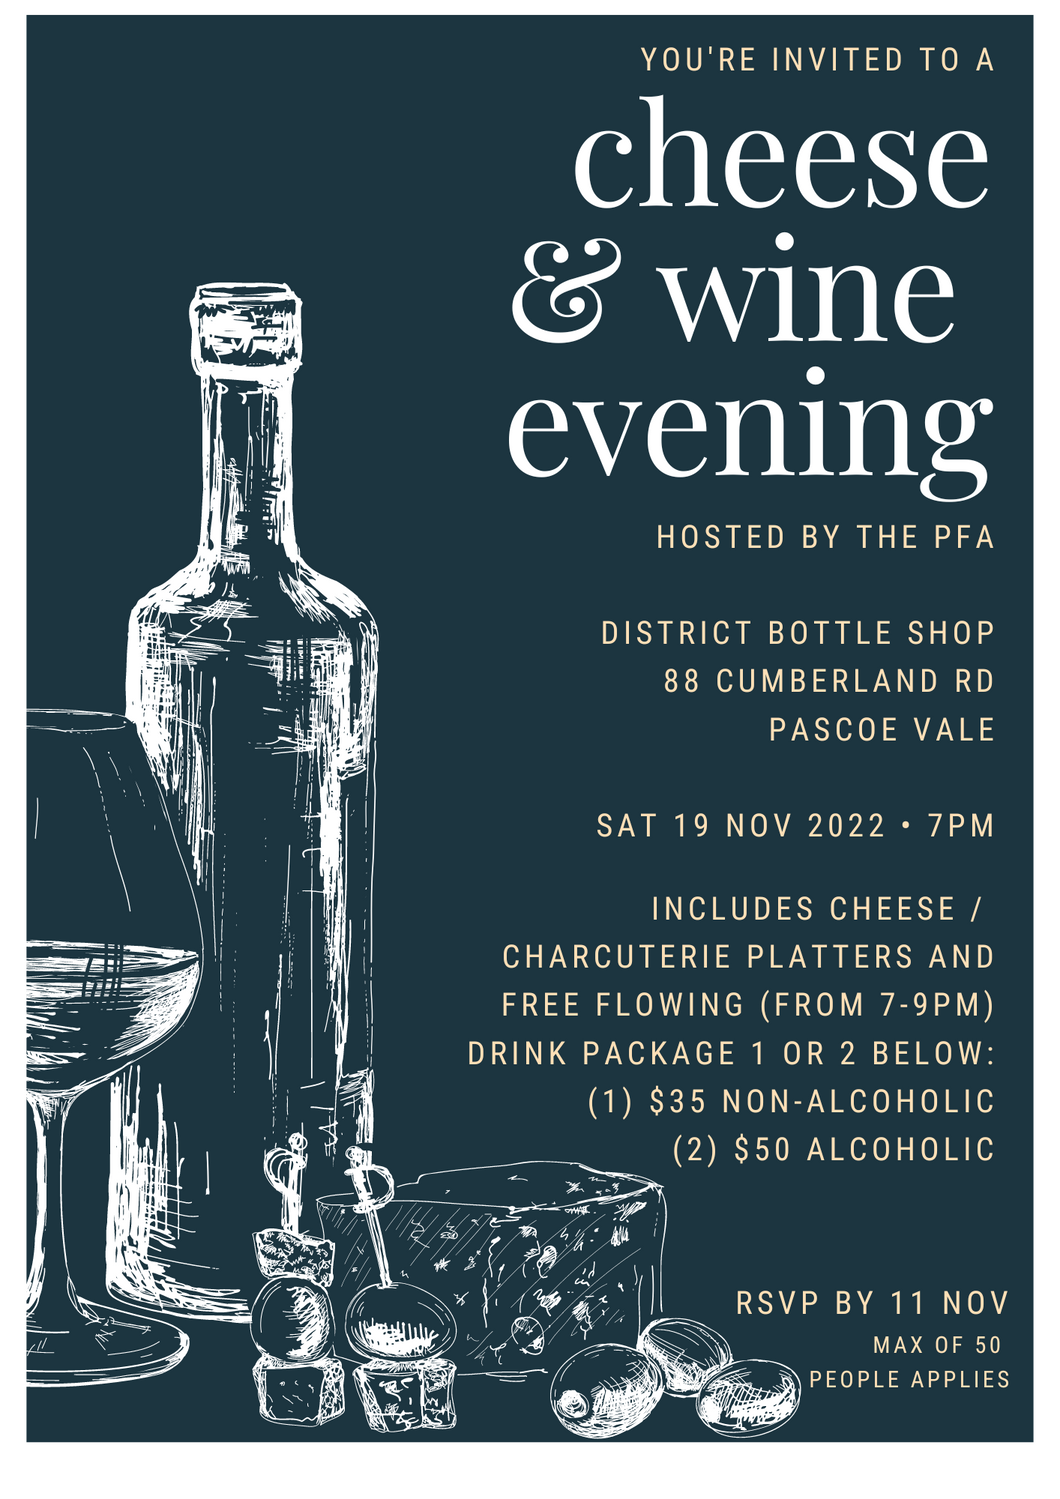 Cheese and Wine Evening Hosted by the PFA